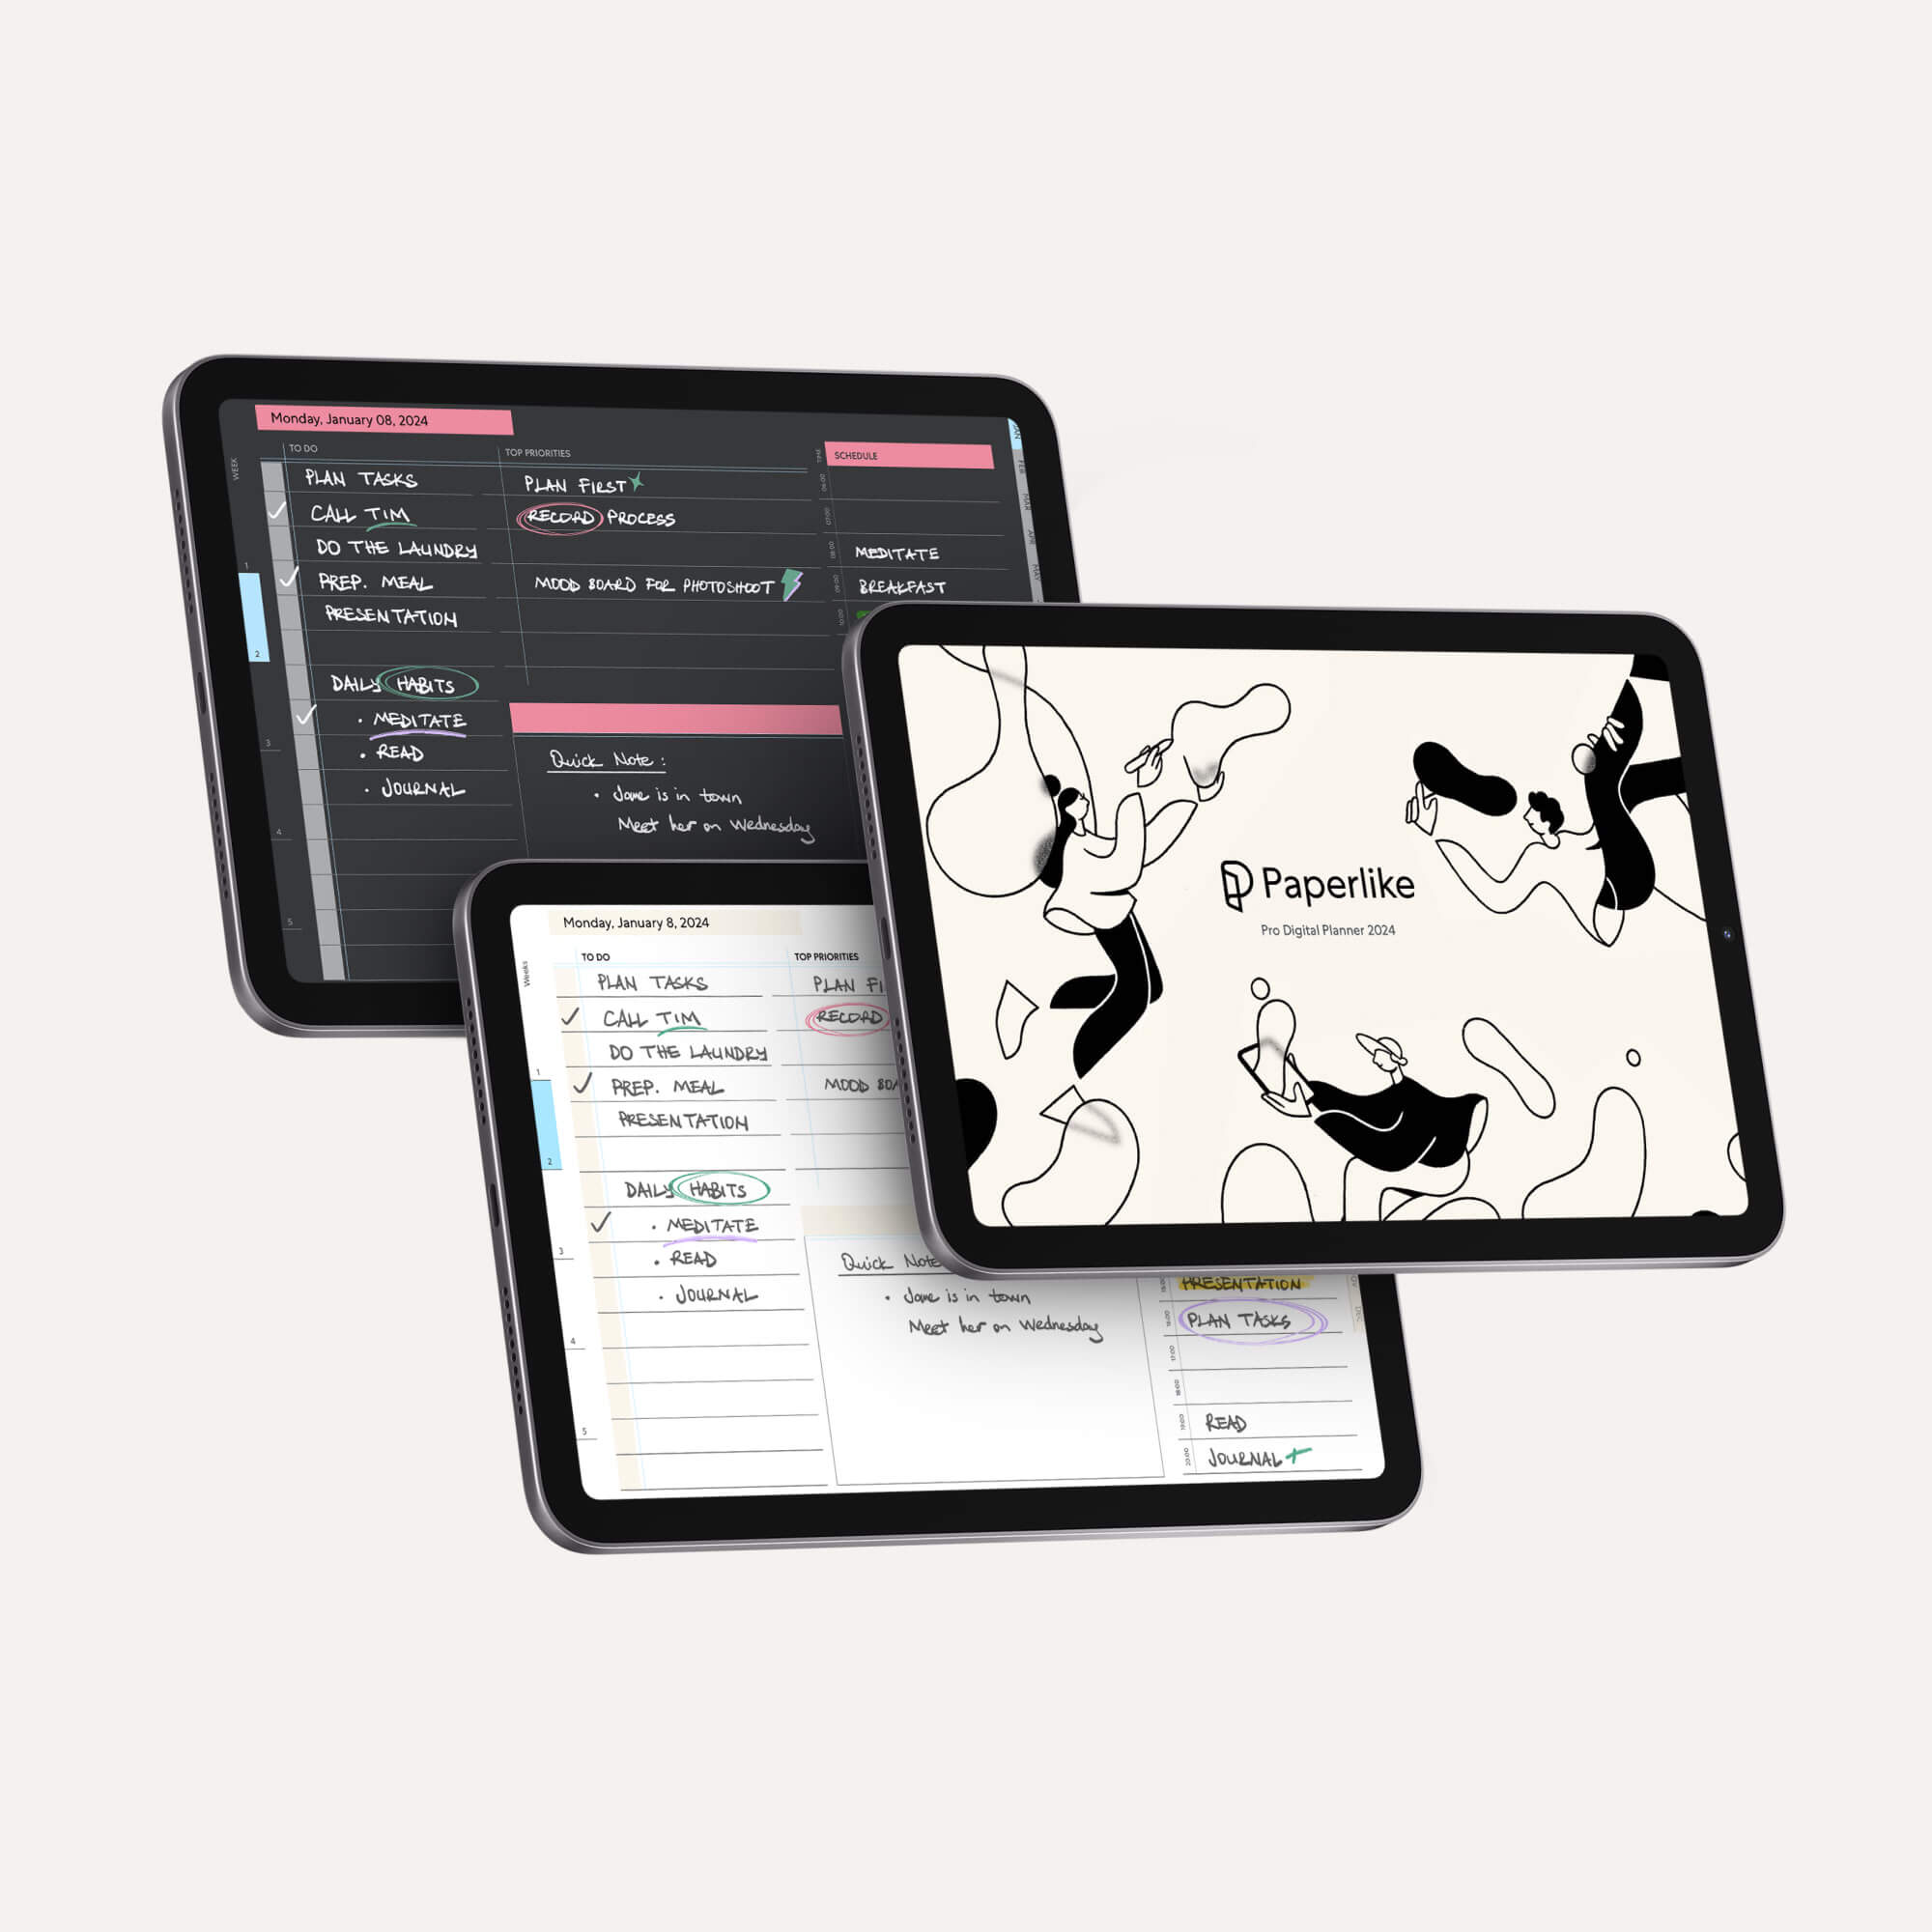 3 iPads with light mode and dark mode of the digital planner